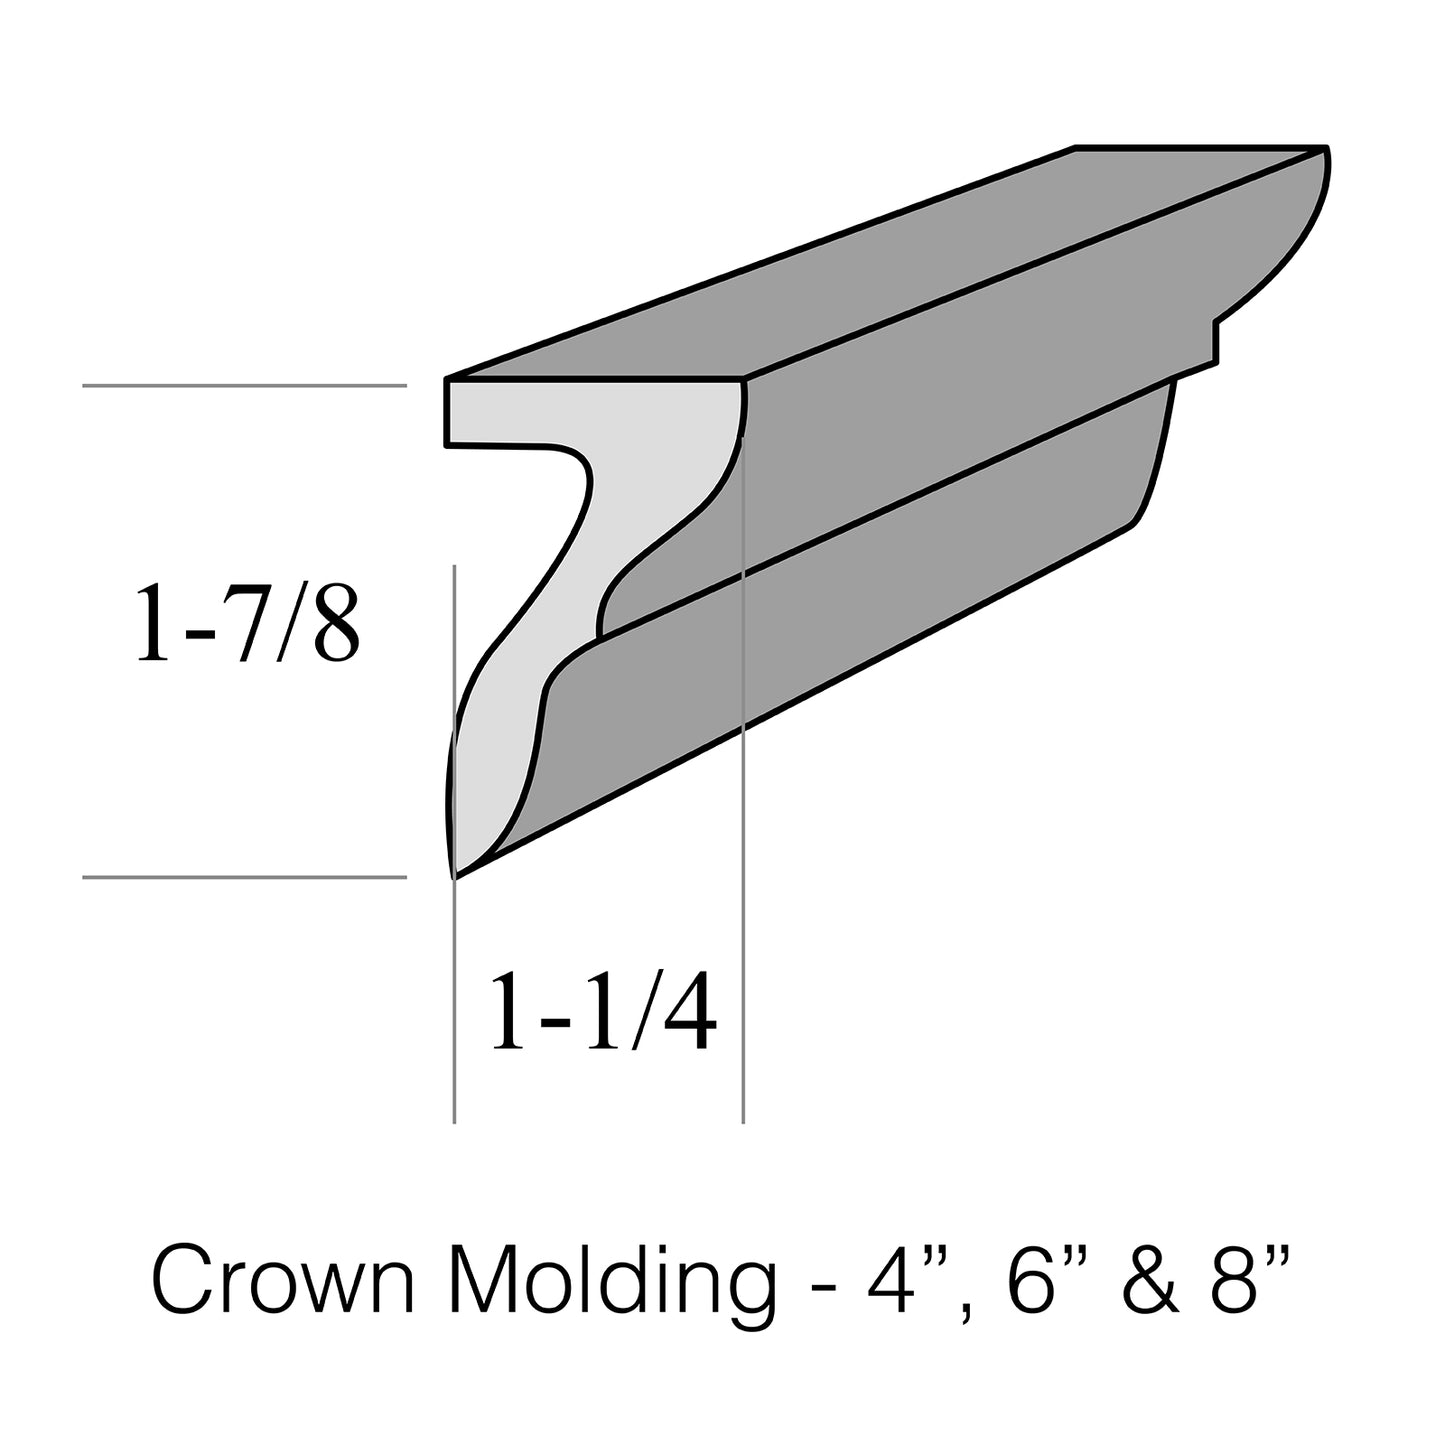 Crown Molding 8"